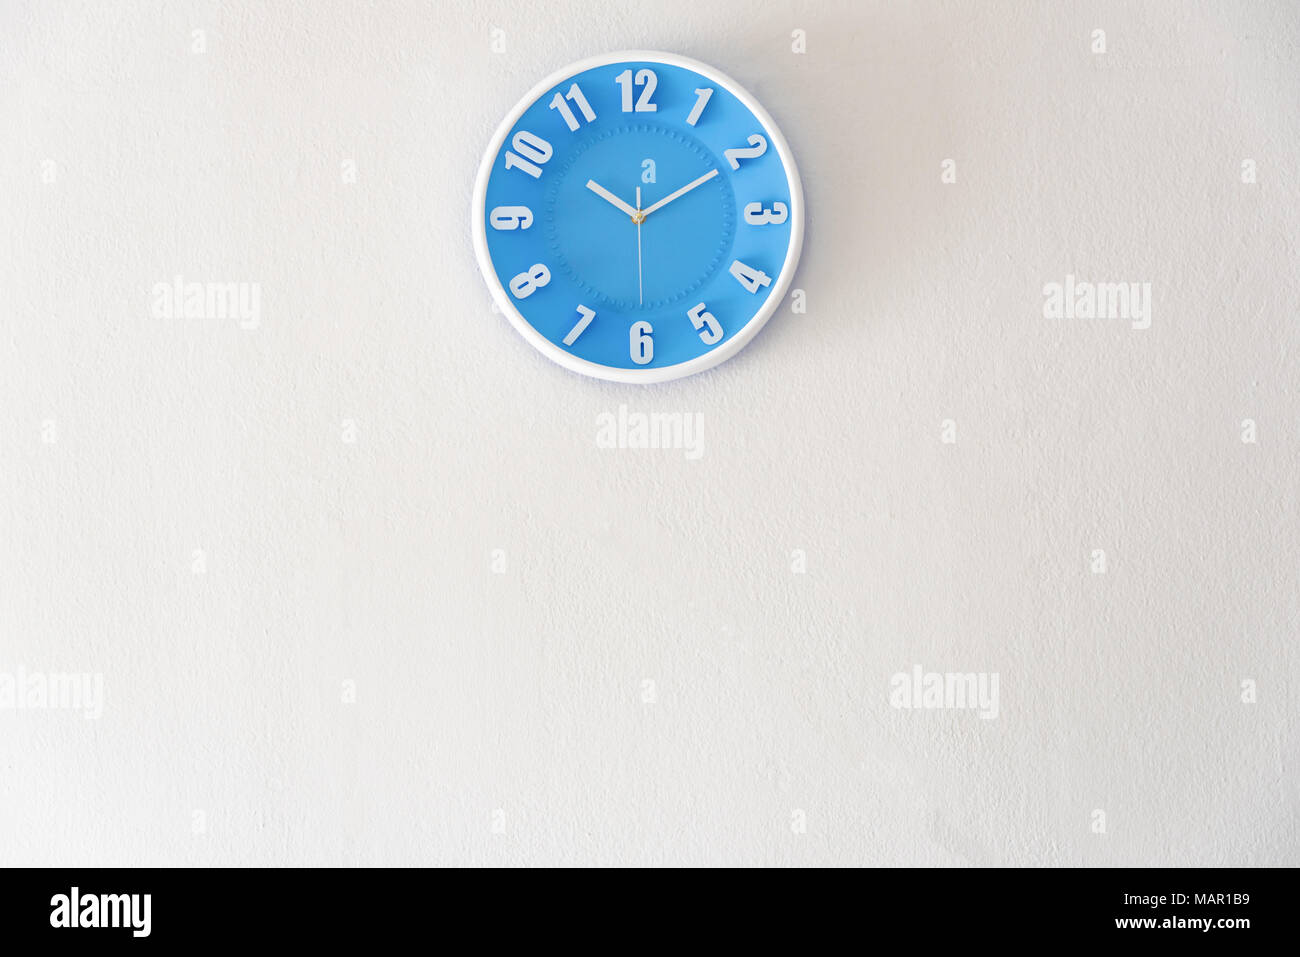 Morning, night or bed time with 10:10 clock on white concrete wall interior background with copy space, message board concept. 10 am is the late time  Stock Photo